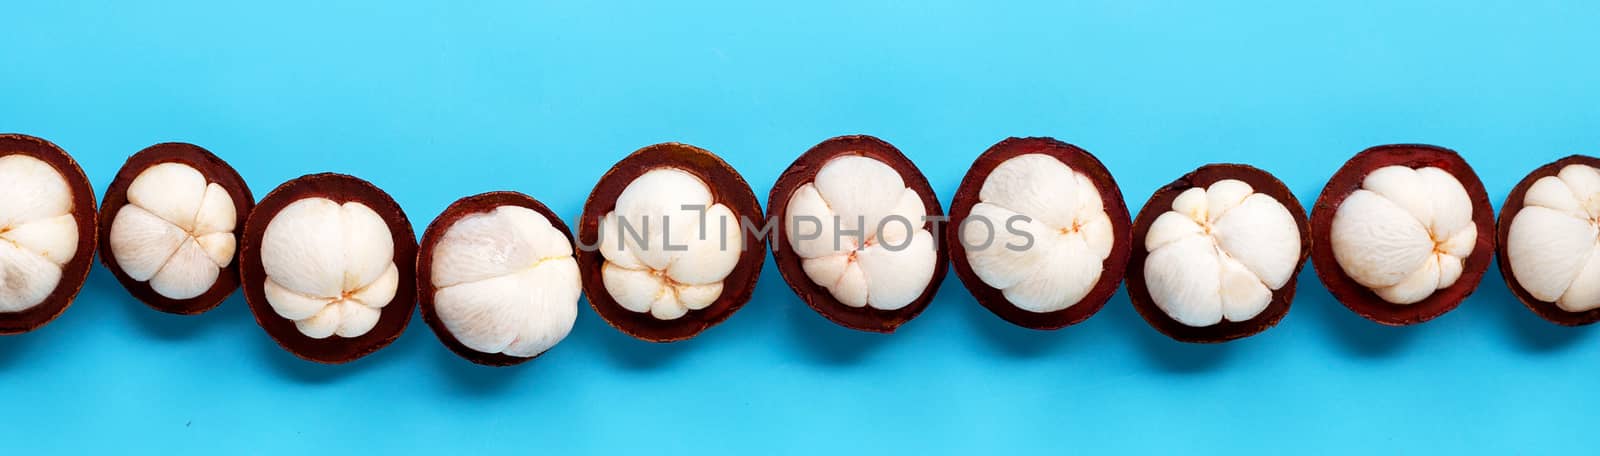 Mangosteen on blue background. Top view